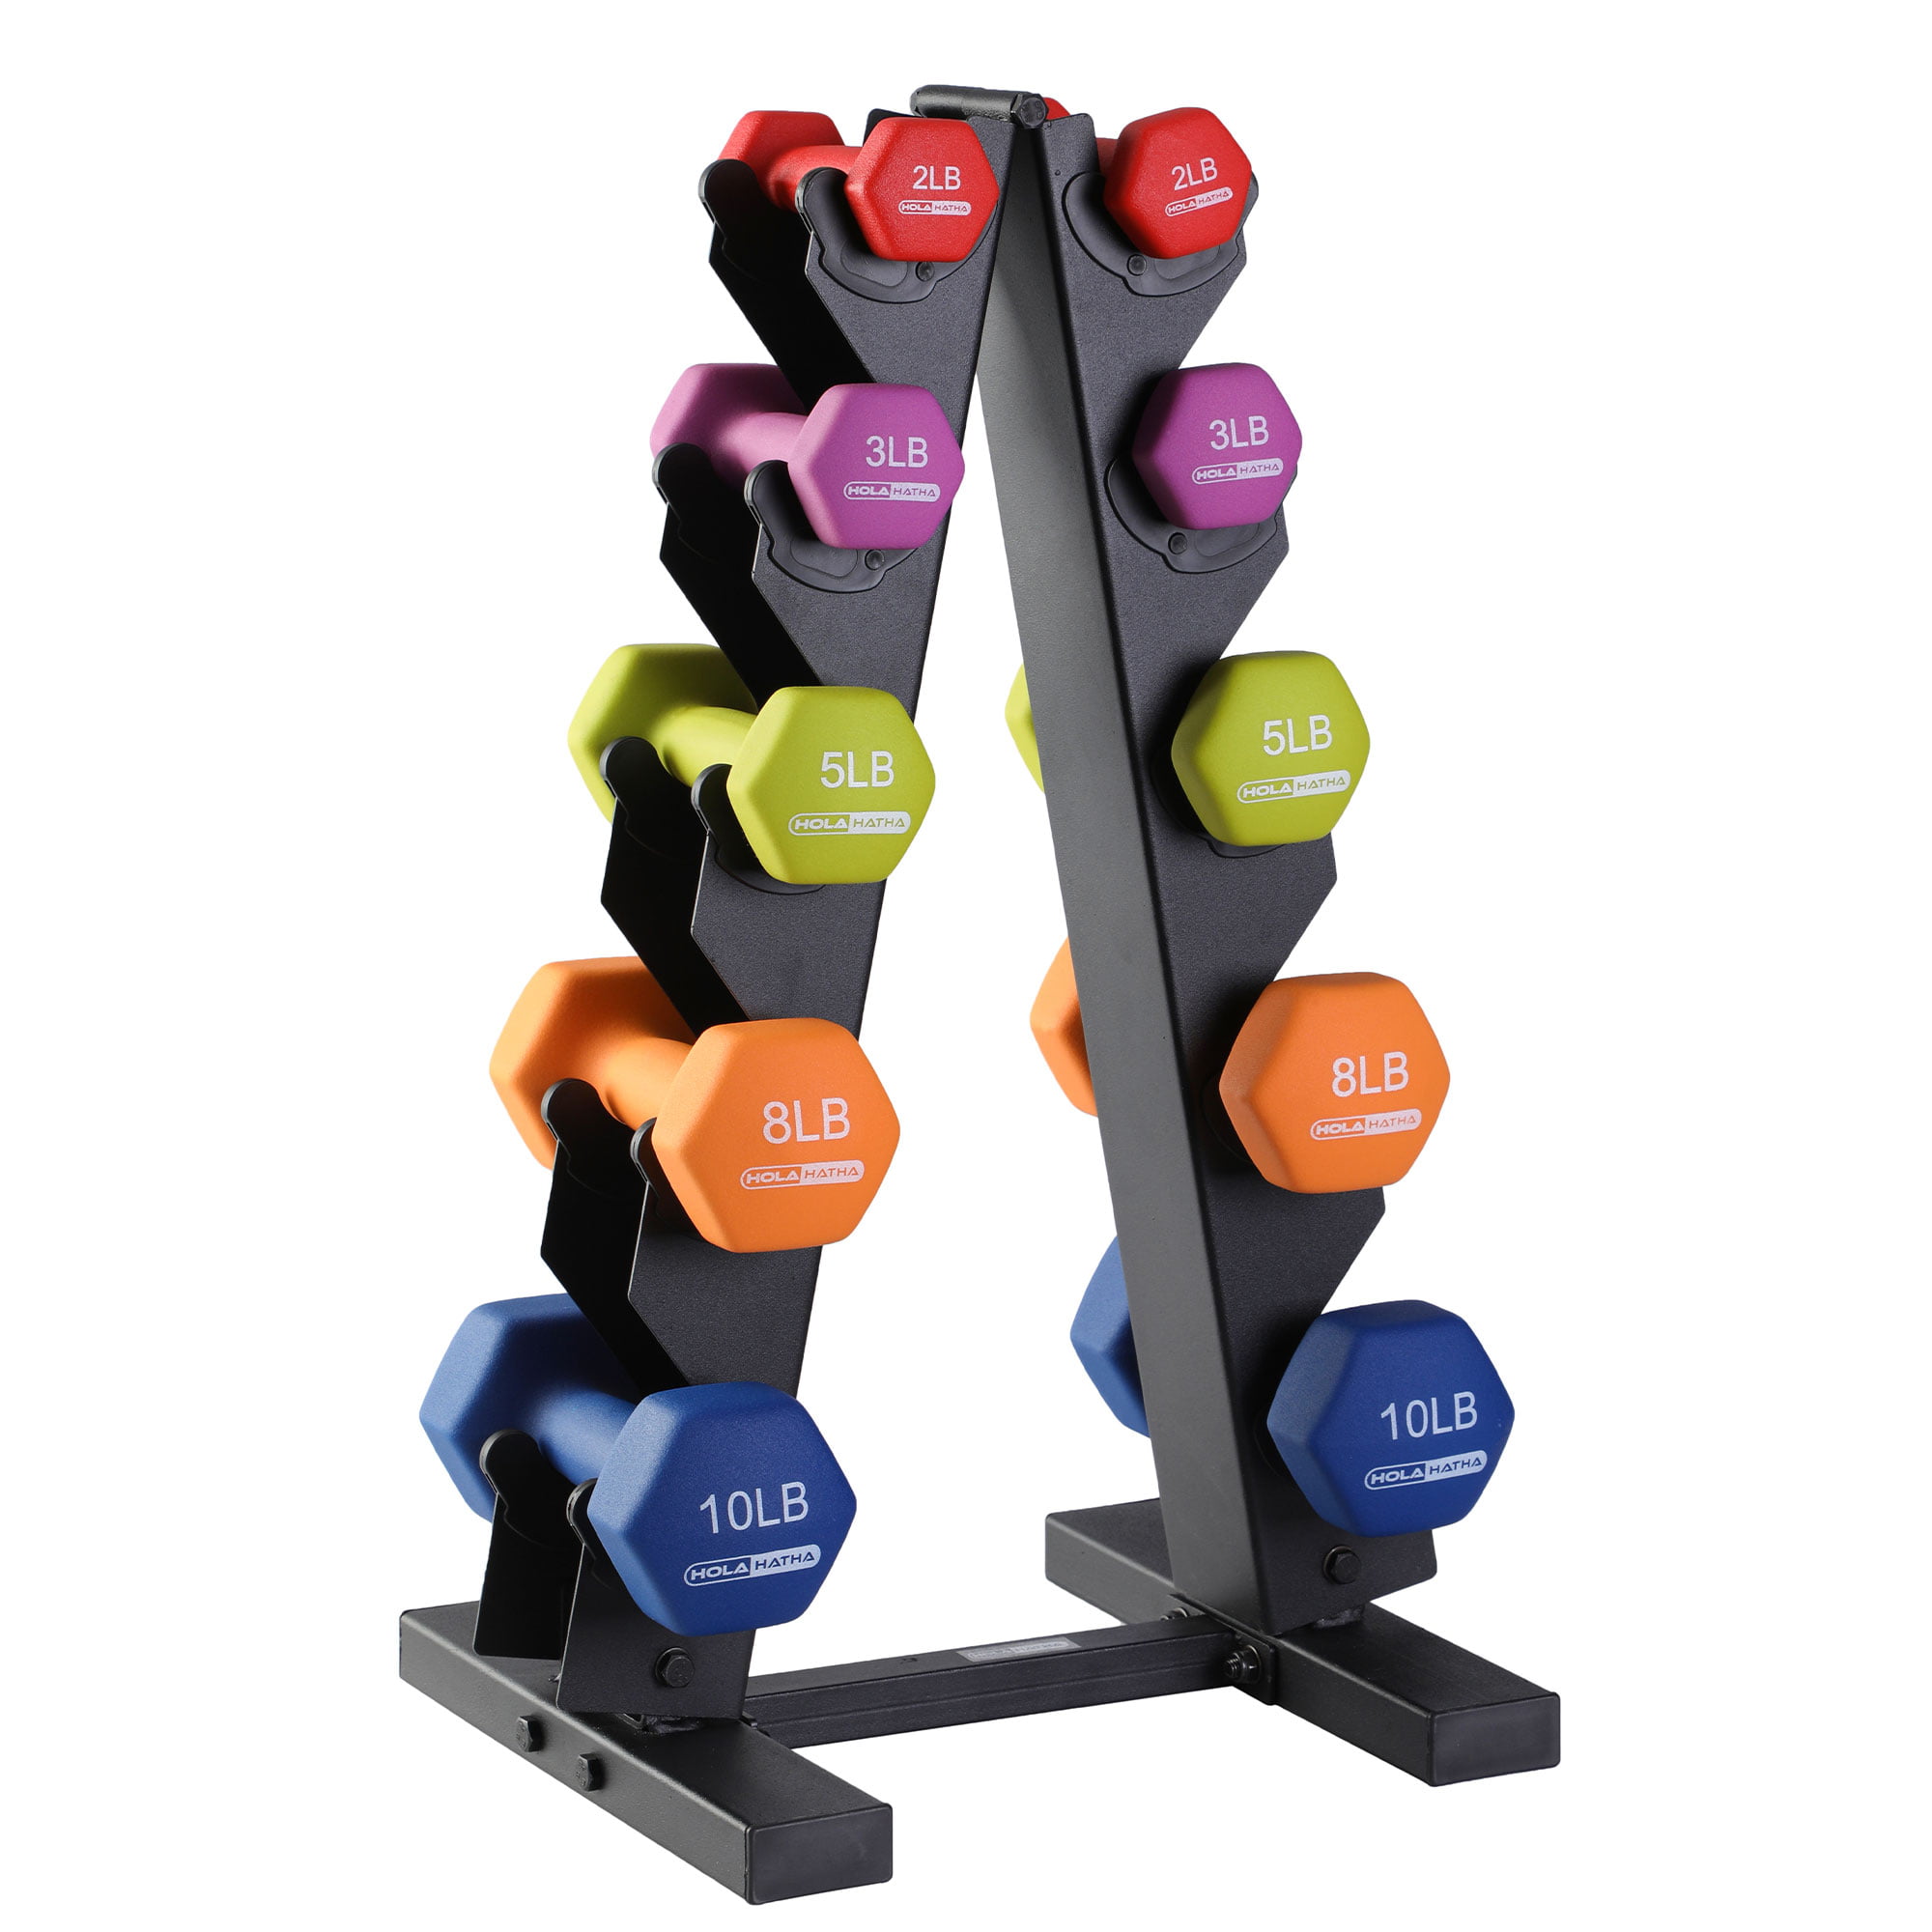 0.5/1 / 1.5 kg 3 Pairs of Neoprene Free Weights with Stand PRISP Dumbbells Set with Rack